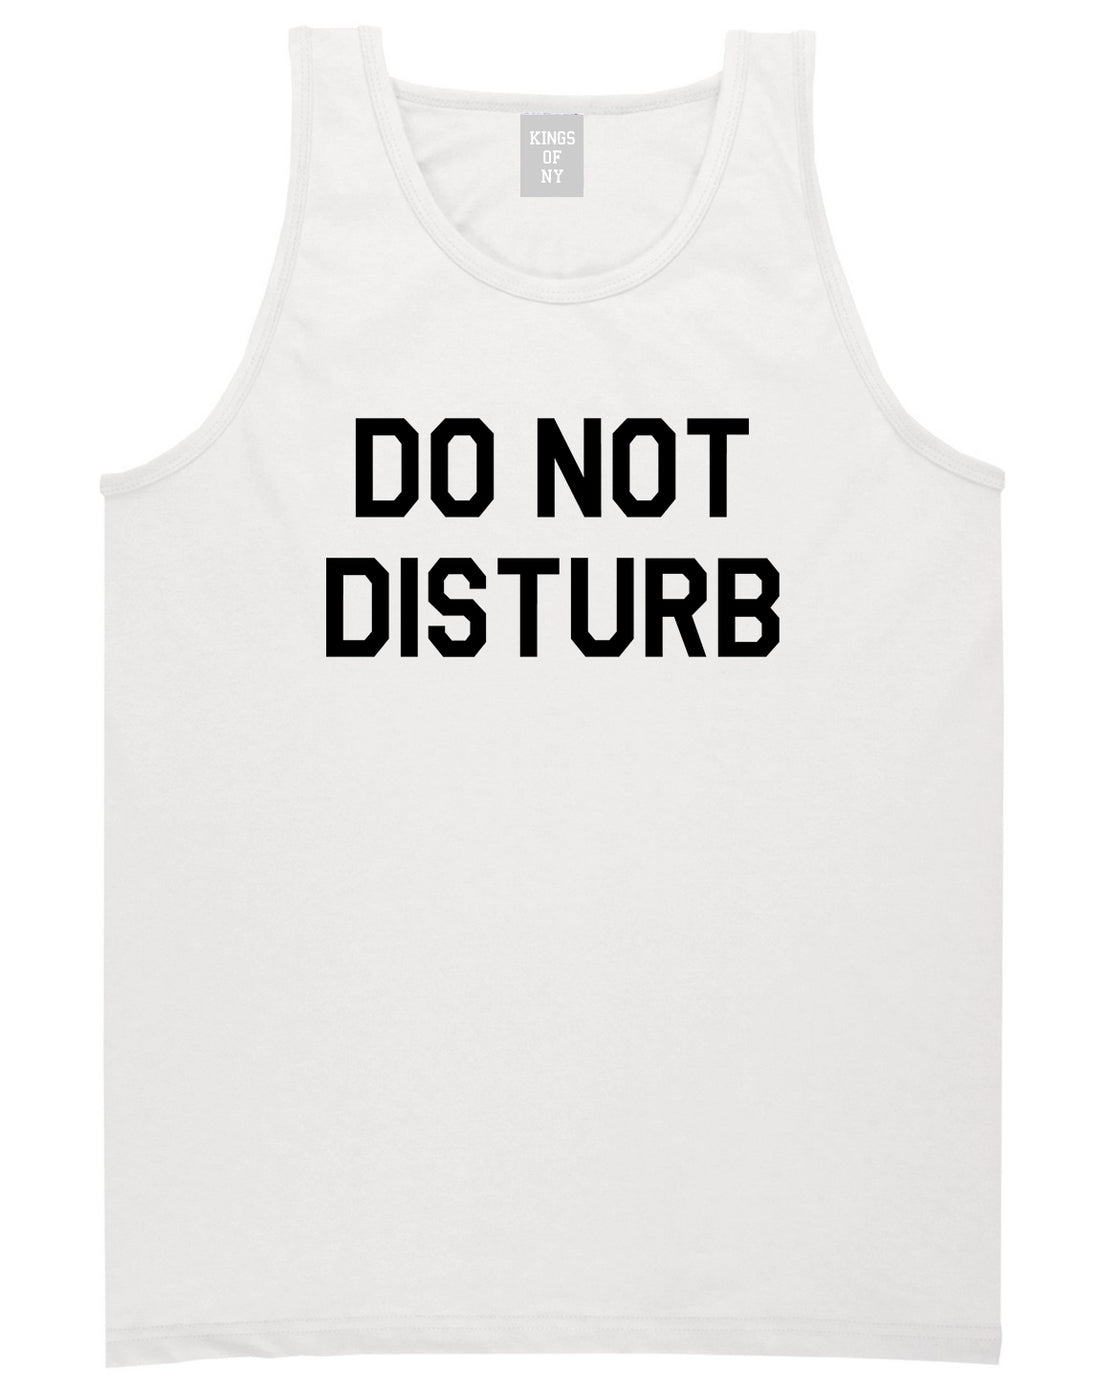 Do_Not_Disturb Mens White Tank Top Shirt by Kings Of NY